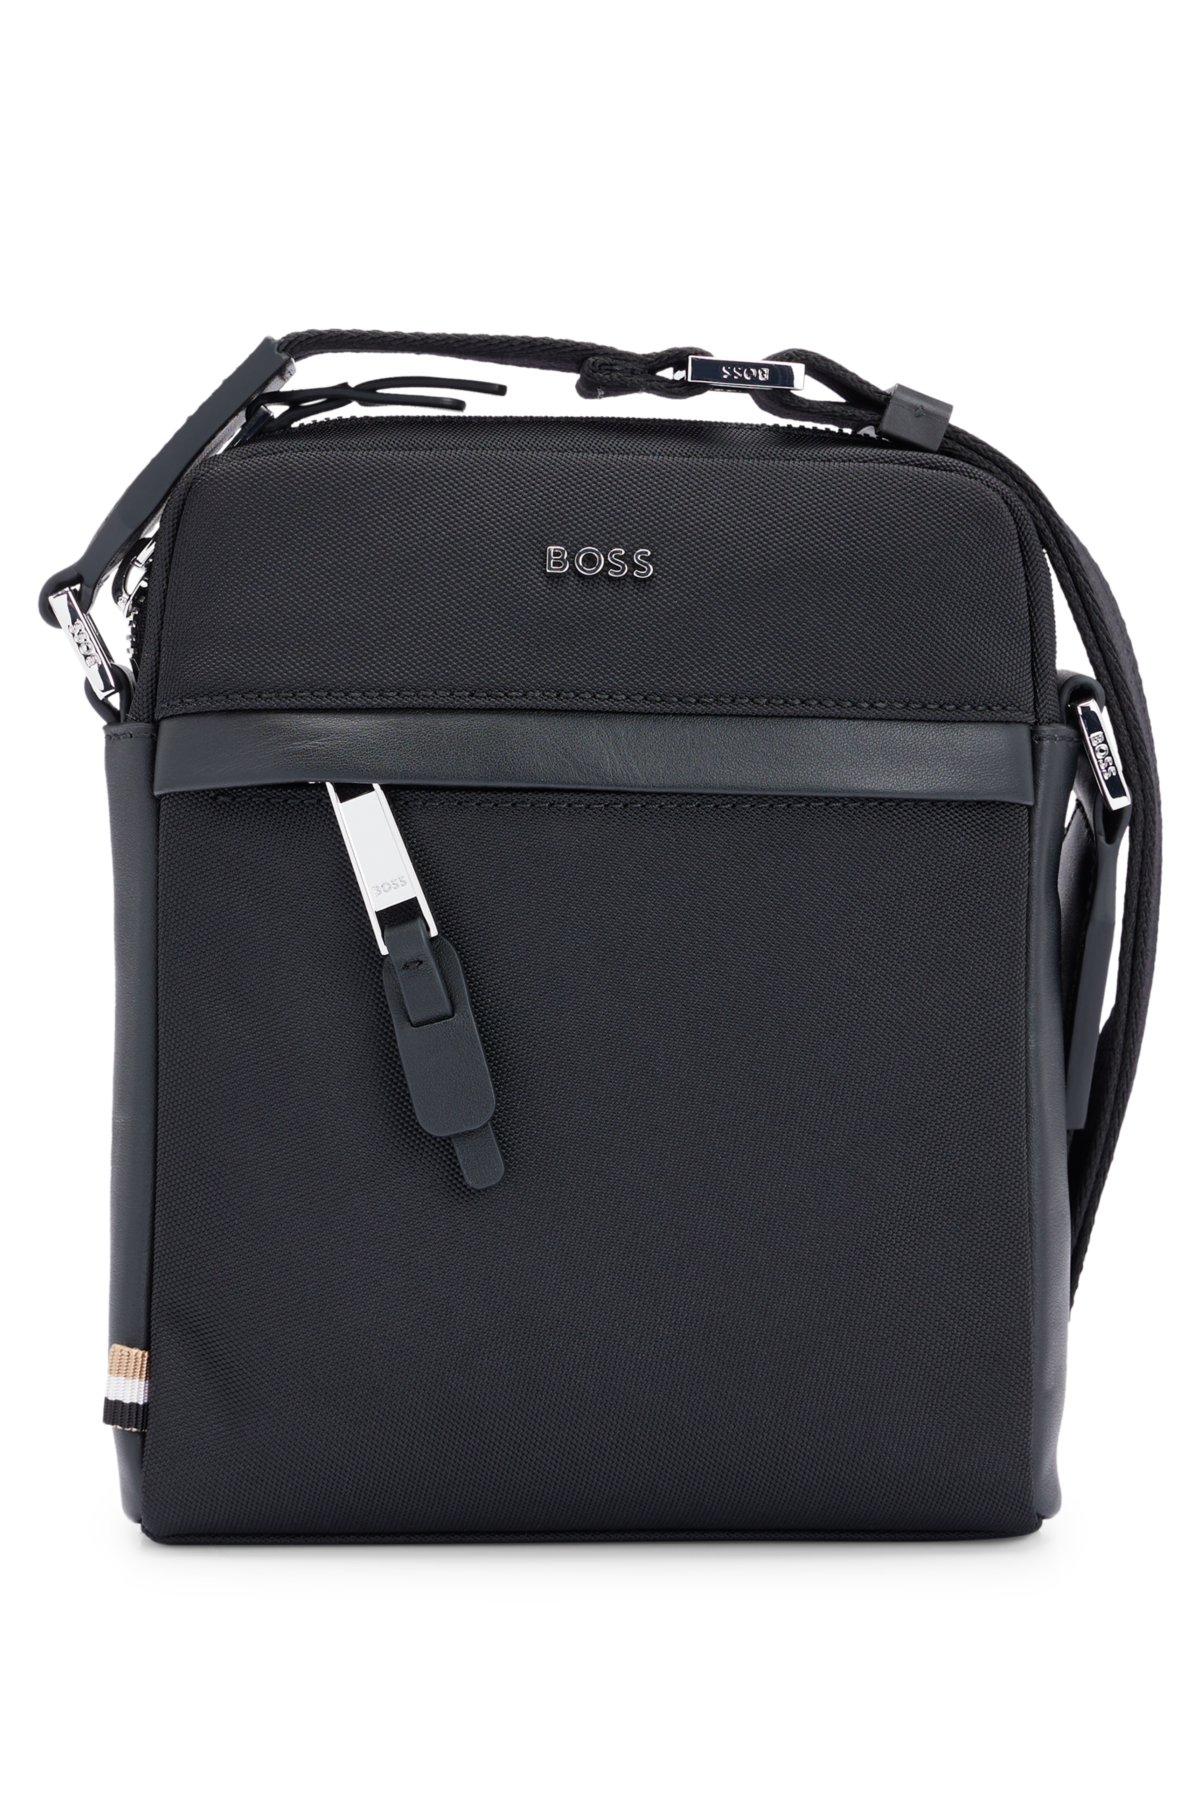 bag - with logo lettering Structured-material BOSS reporter